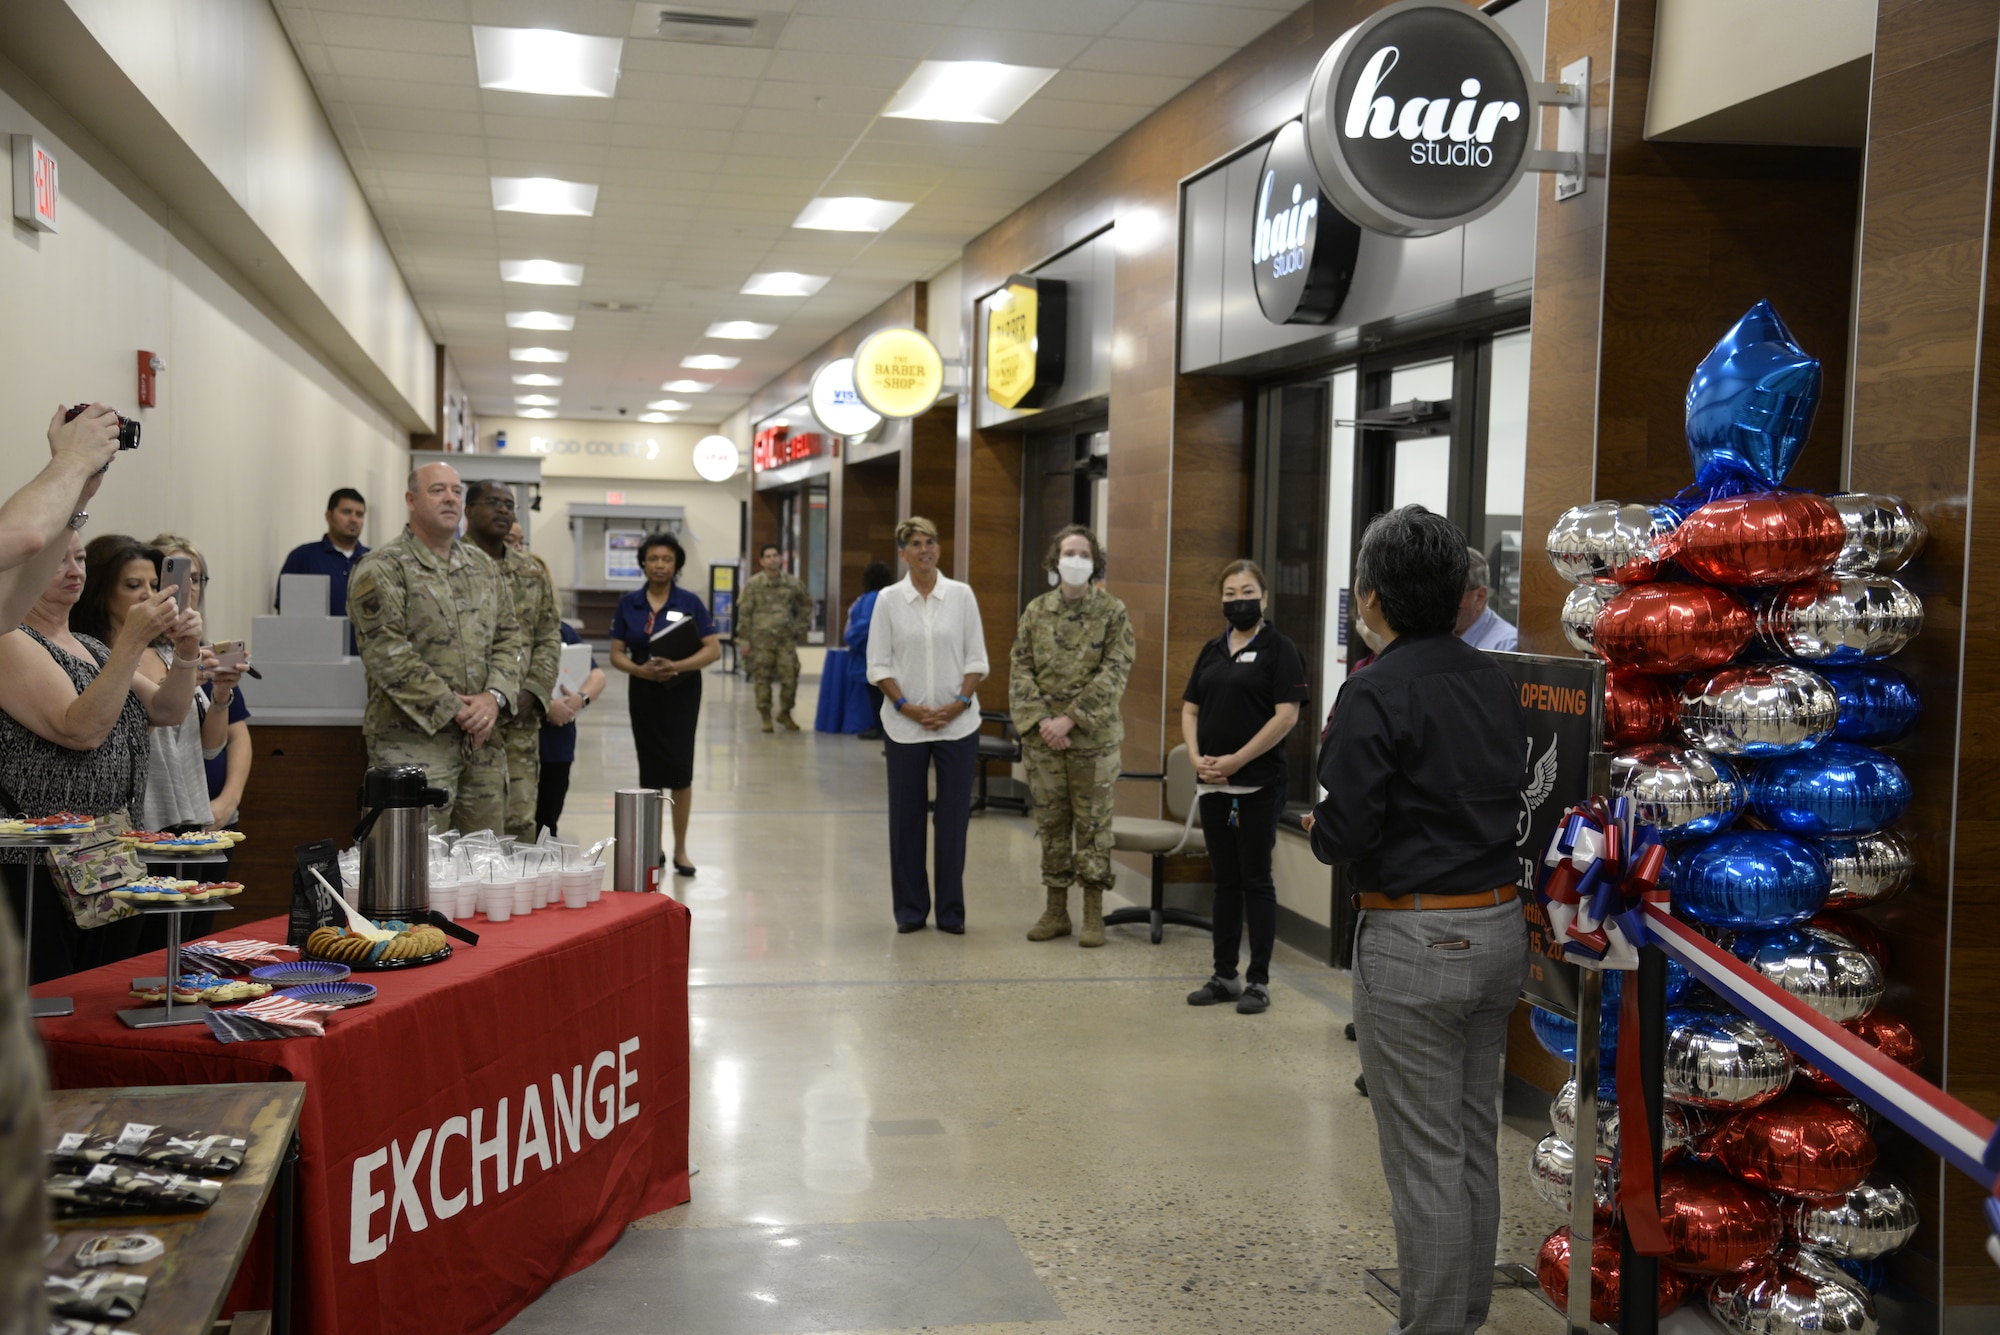 Installation leaders join Army & Air Force Exchange Service managers during the opening of Bunker 27 at Wright-Patterson Air Force Base on July 15. A ribbon-cutting ceremony marked the new store’s opening at the Base Exchange. (U.S. Air Force photo by Airman 1st Class Jack Gardner)